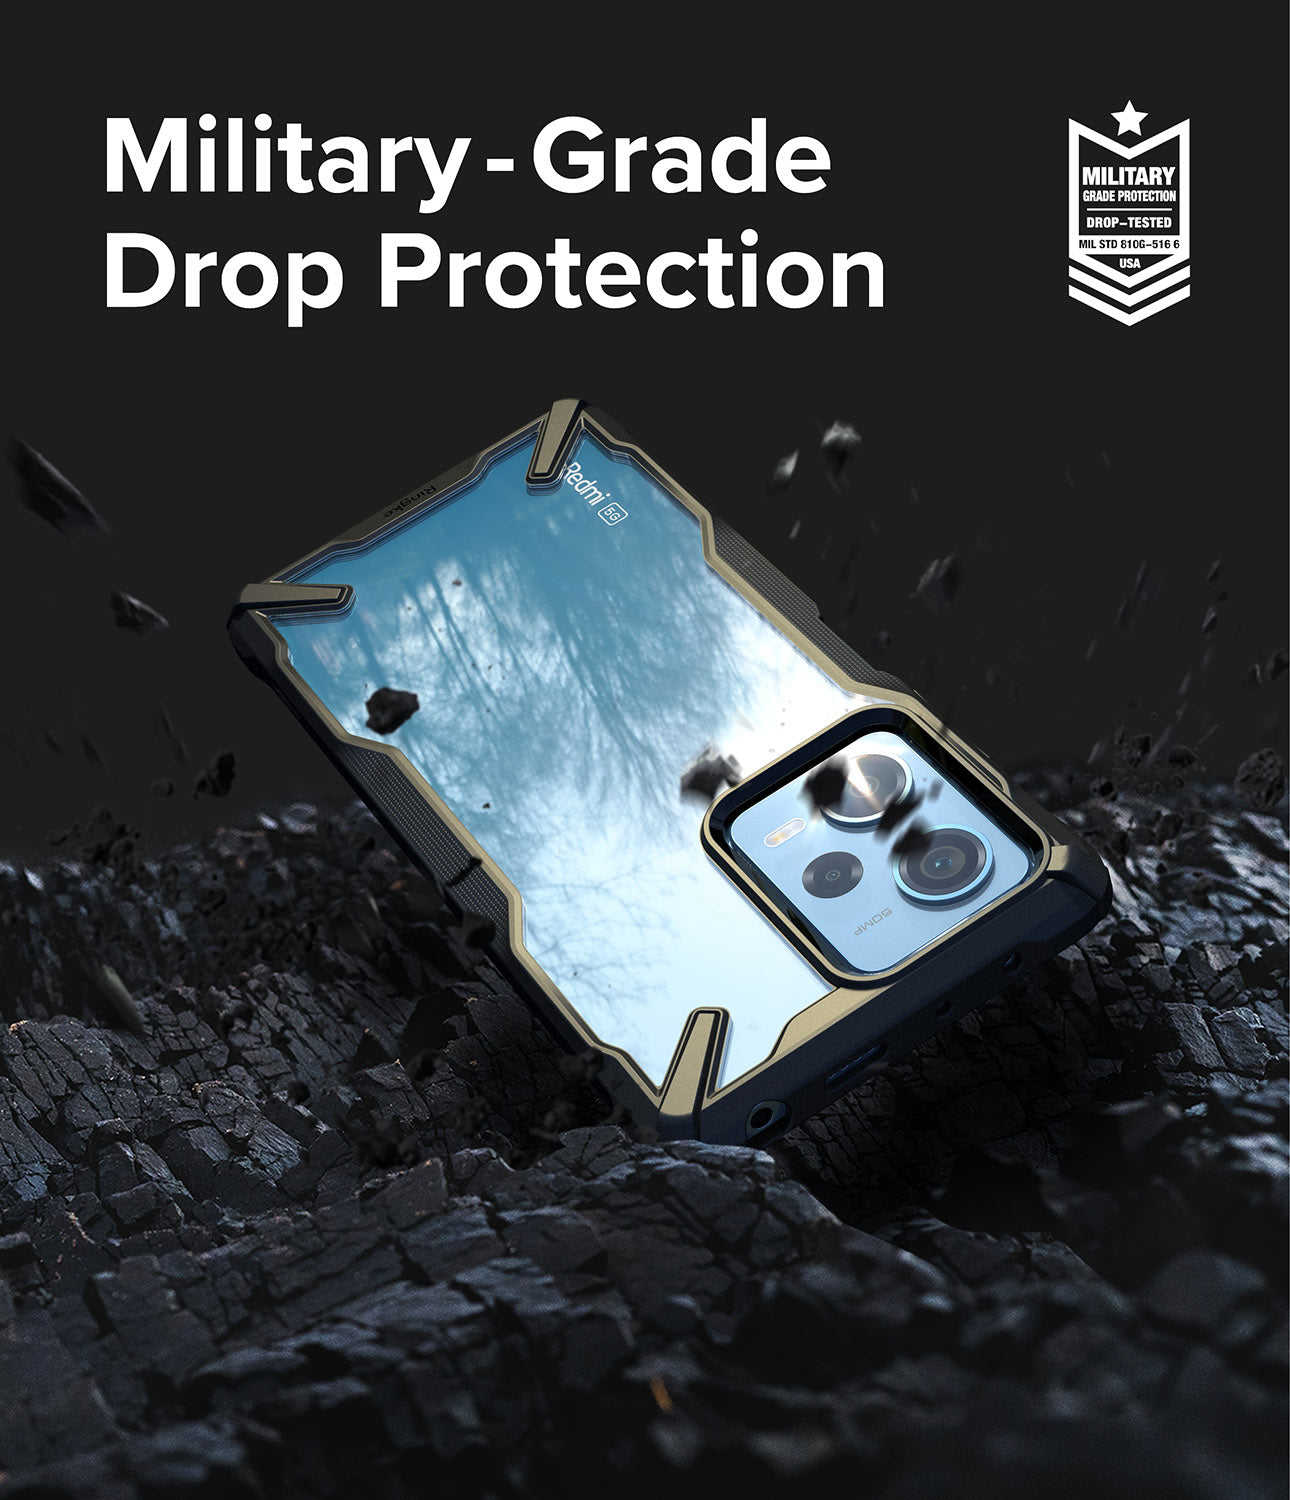 Military- Grade Drop Protection